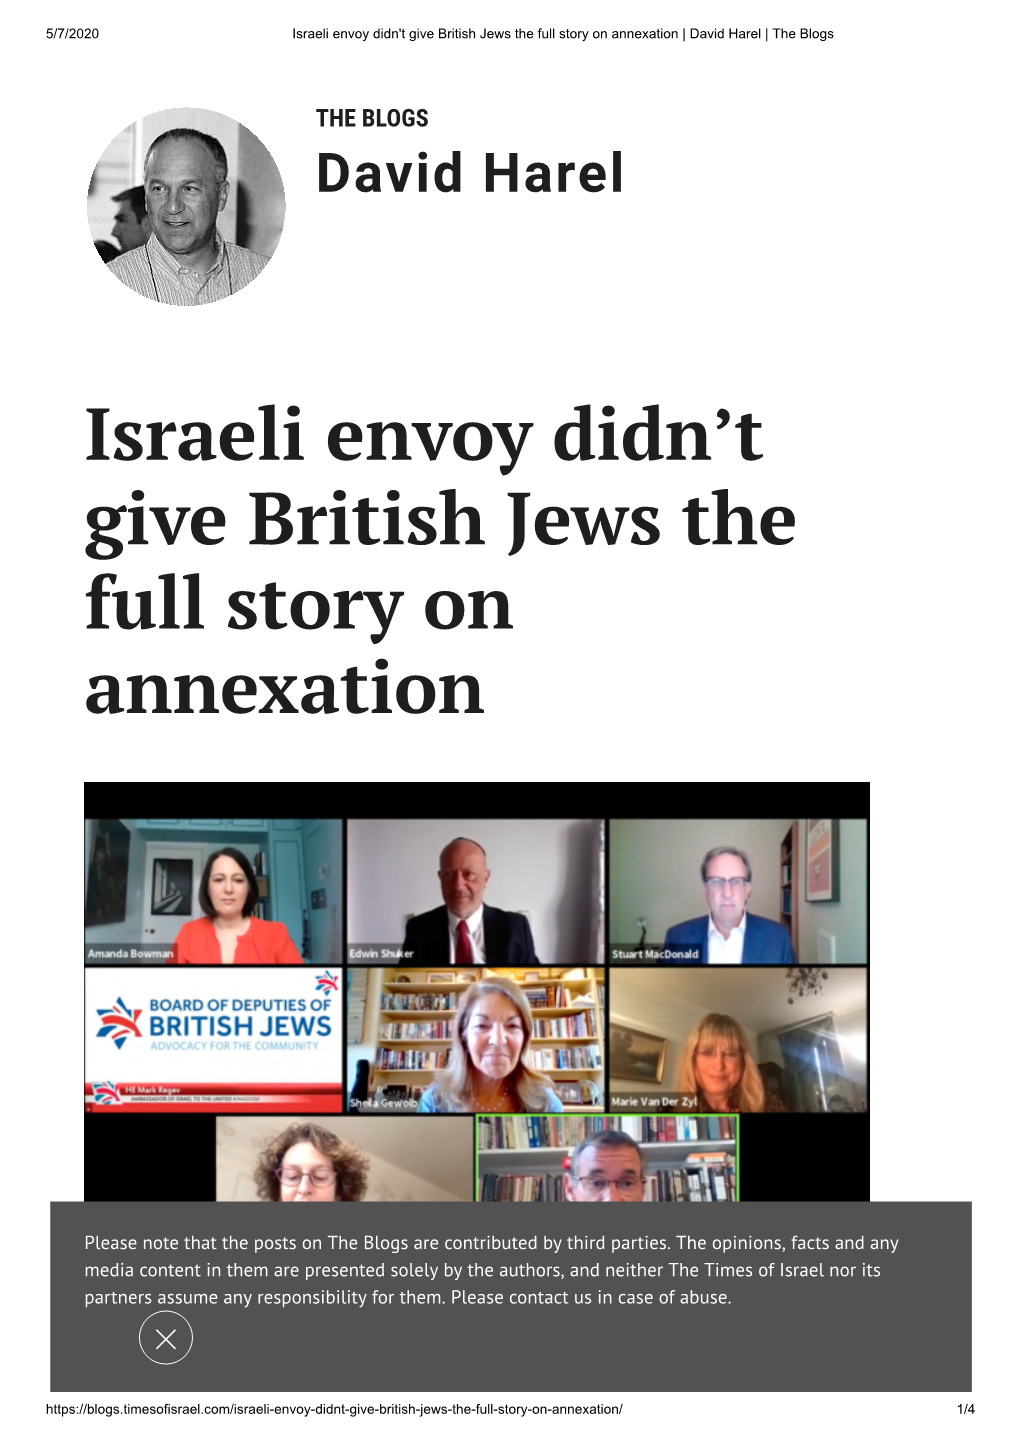 Israeli Envoy Didn't Give British Jews the Full Story on Annexation | David Harel | the Blogs